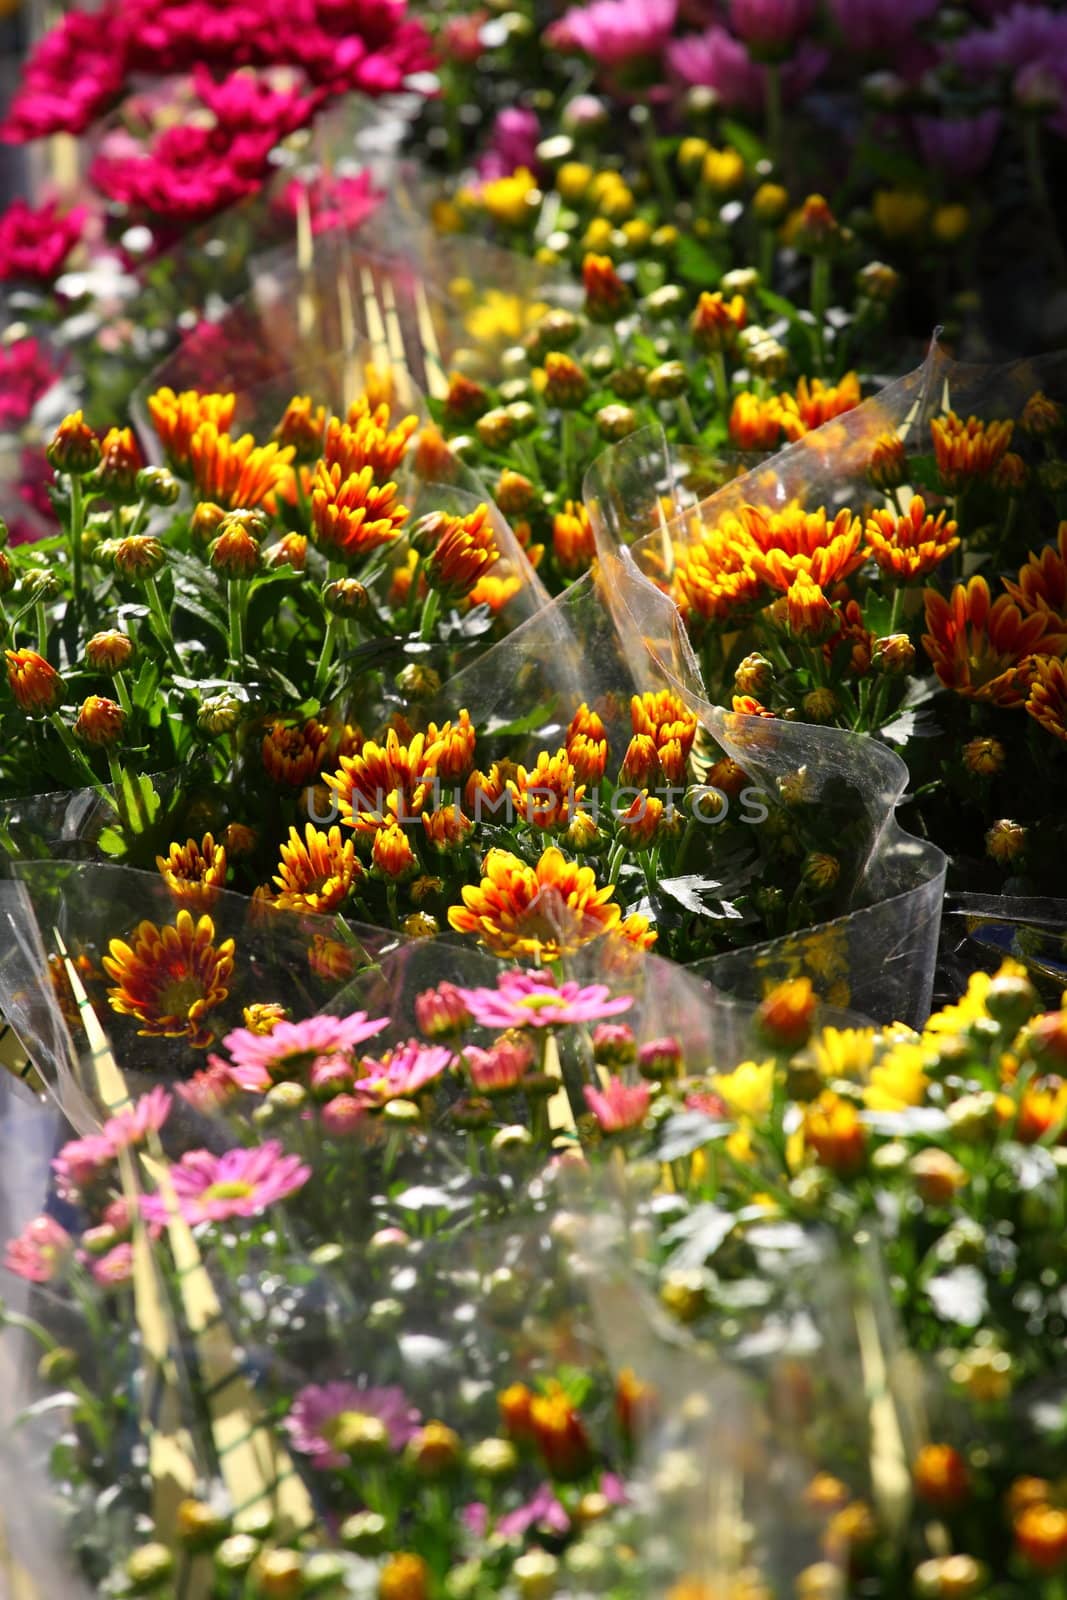 Variety of flowers sold in the market in Paris